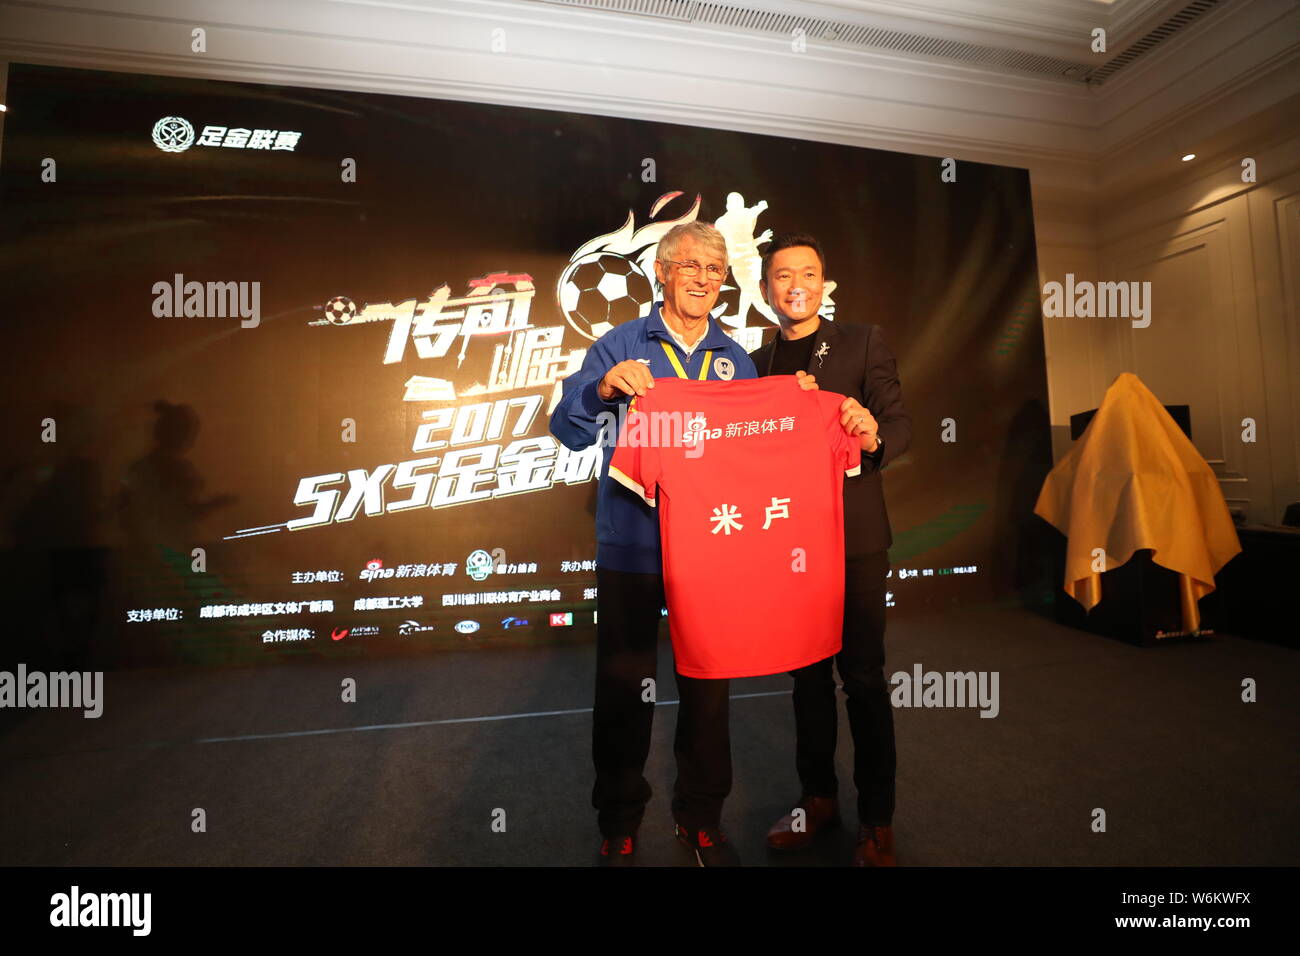 Serbian football coach and former player Bora Milutinovic, left, attends a press conference of Sina 5v5 Football Golden League Finals in Chengdu city, Stock Photo